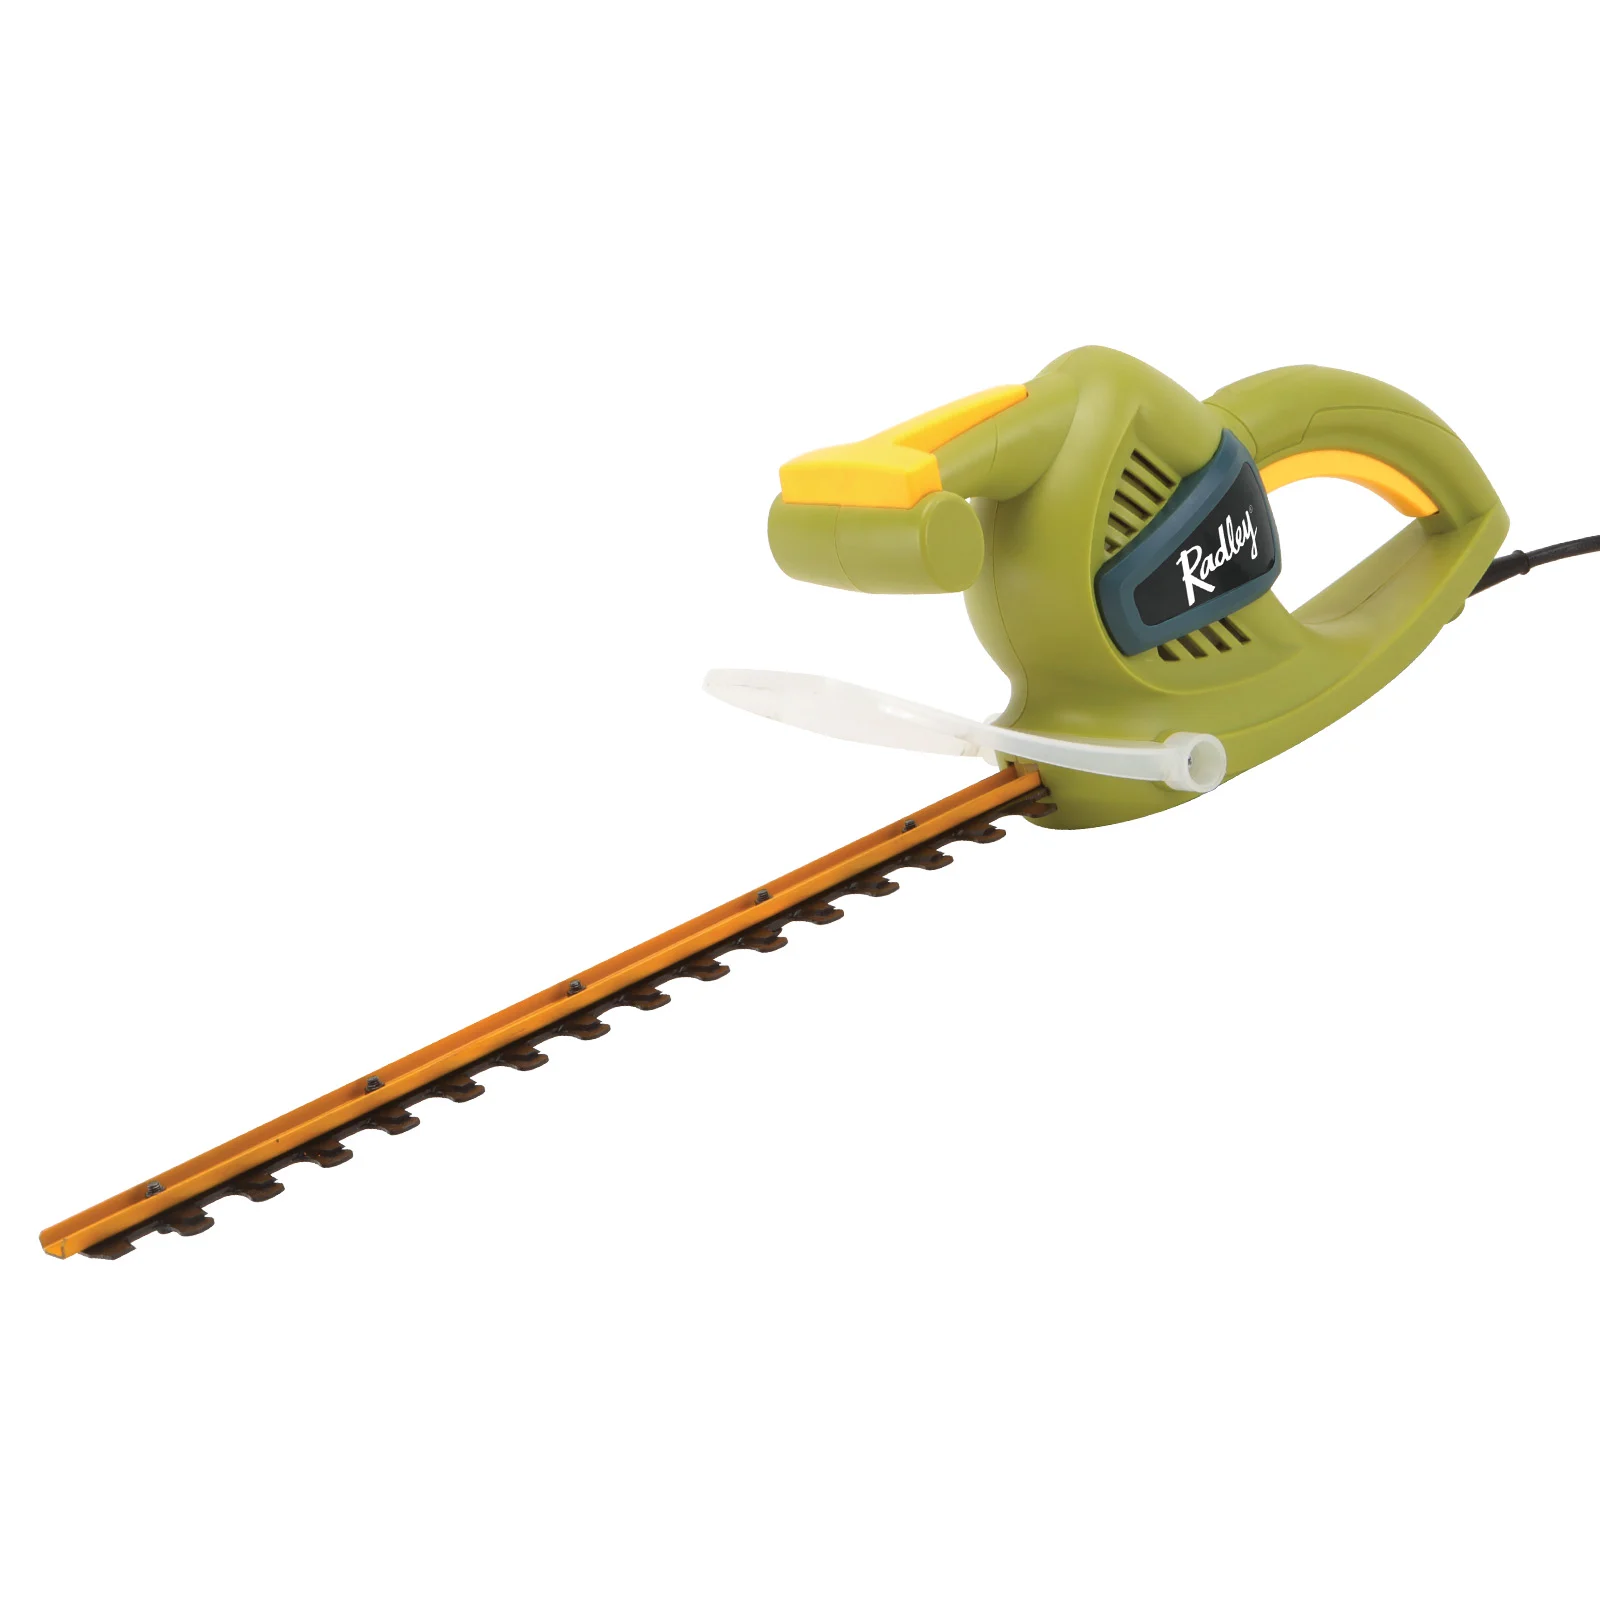 An electric hedge trimmer 